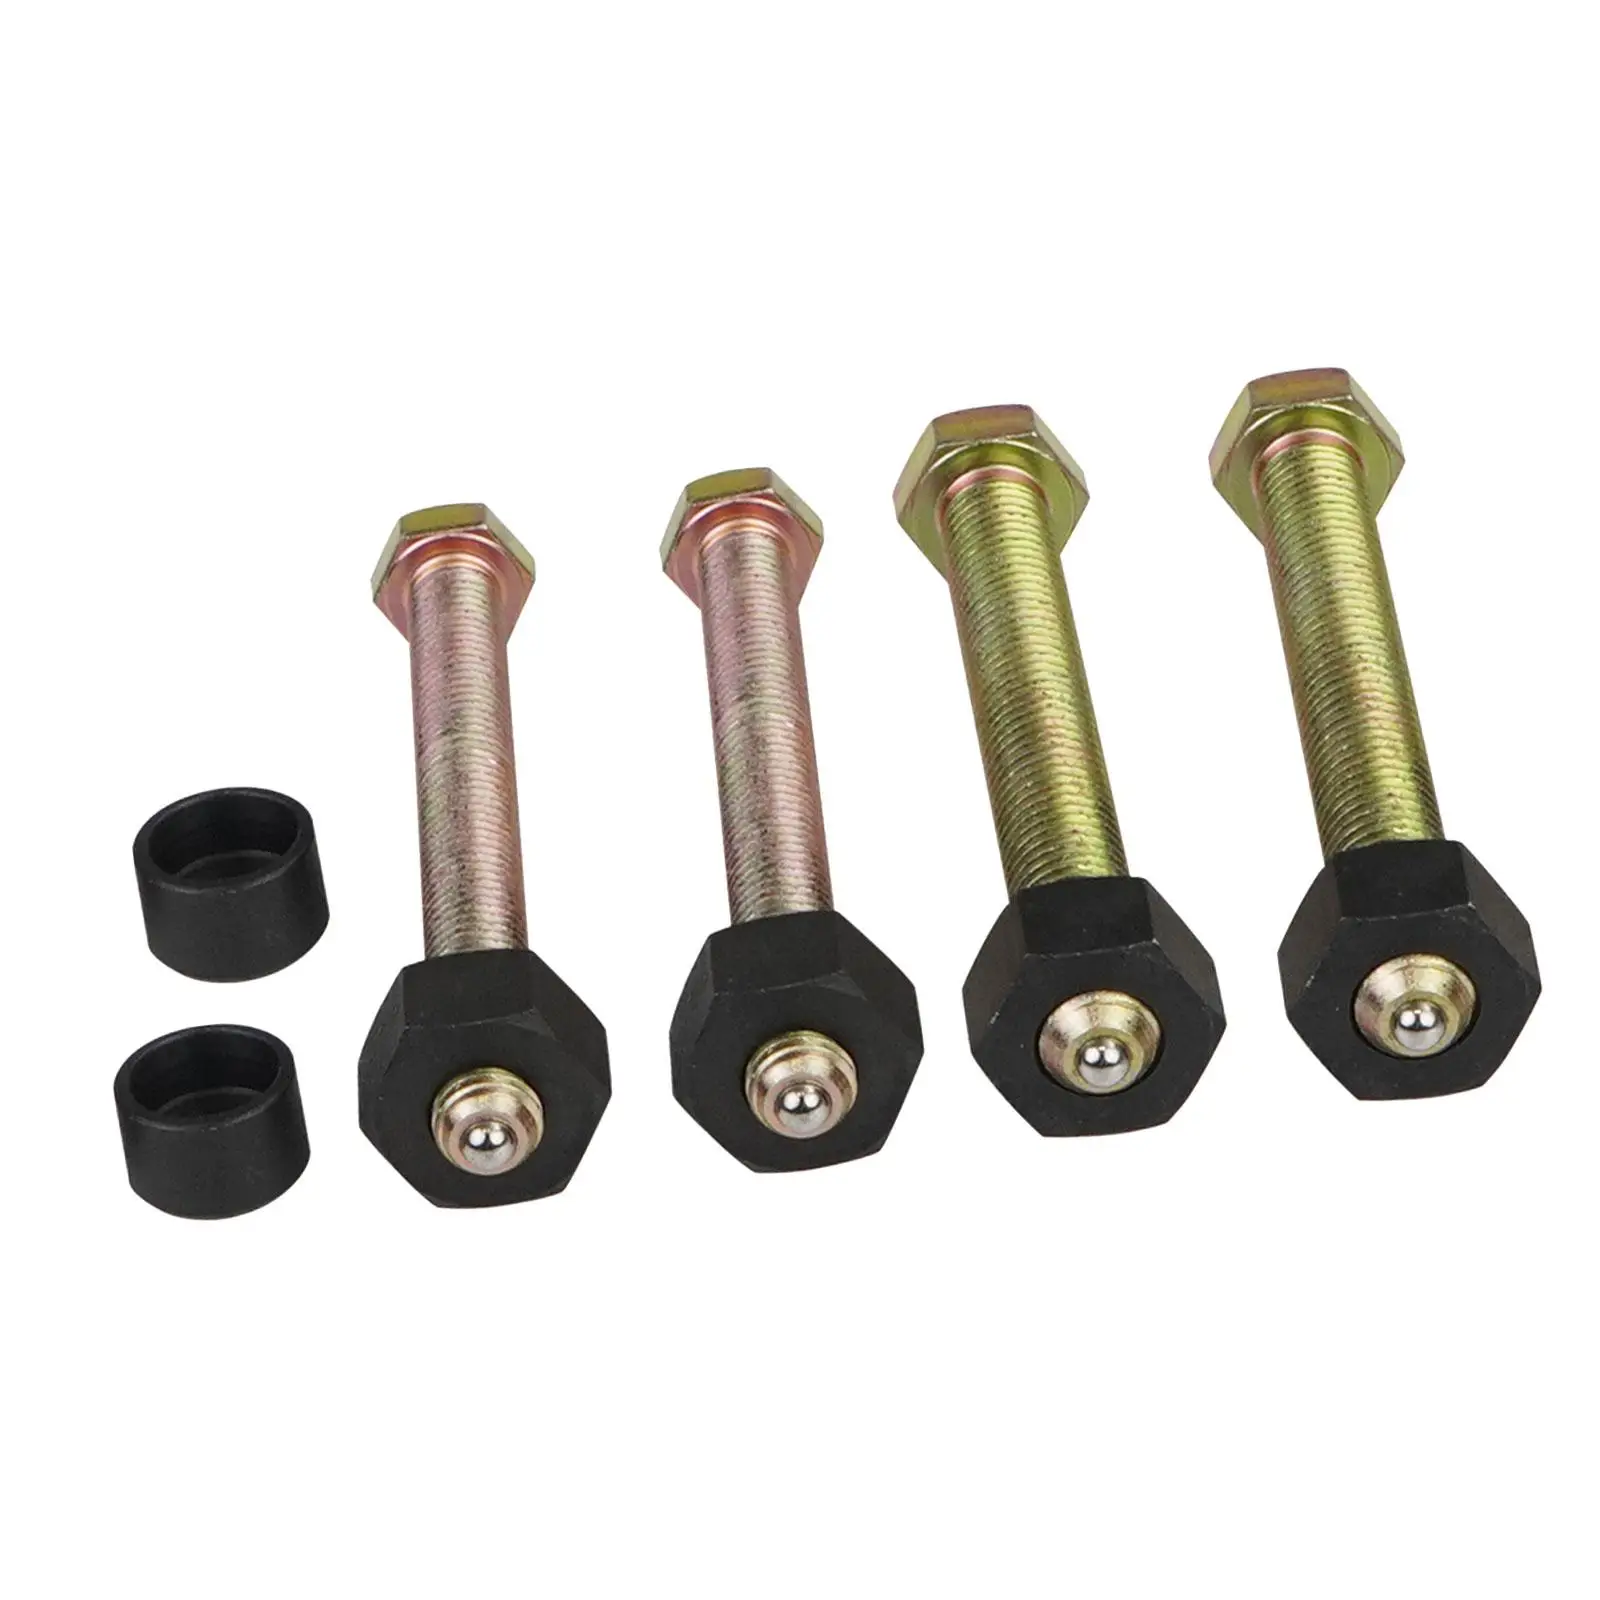 78834 Easy to Install Spare Parts Replaces Impact Rated Hub Removal Bolt Set